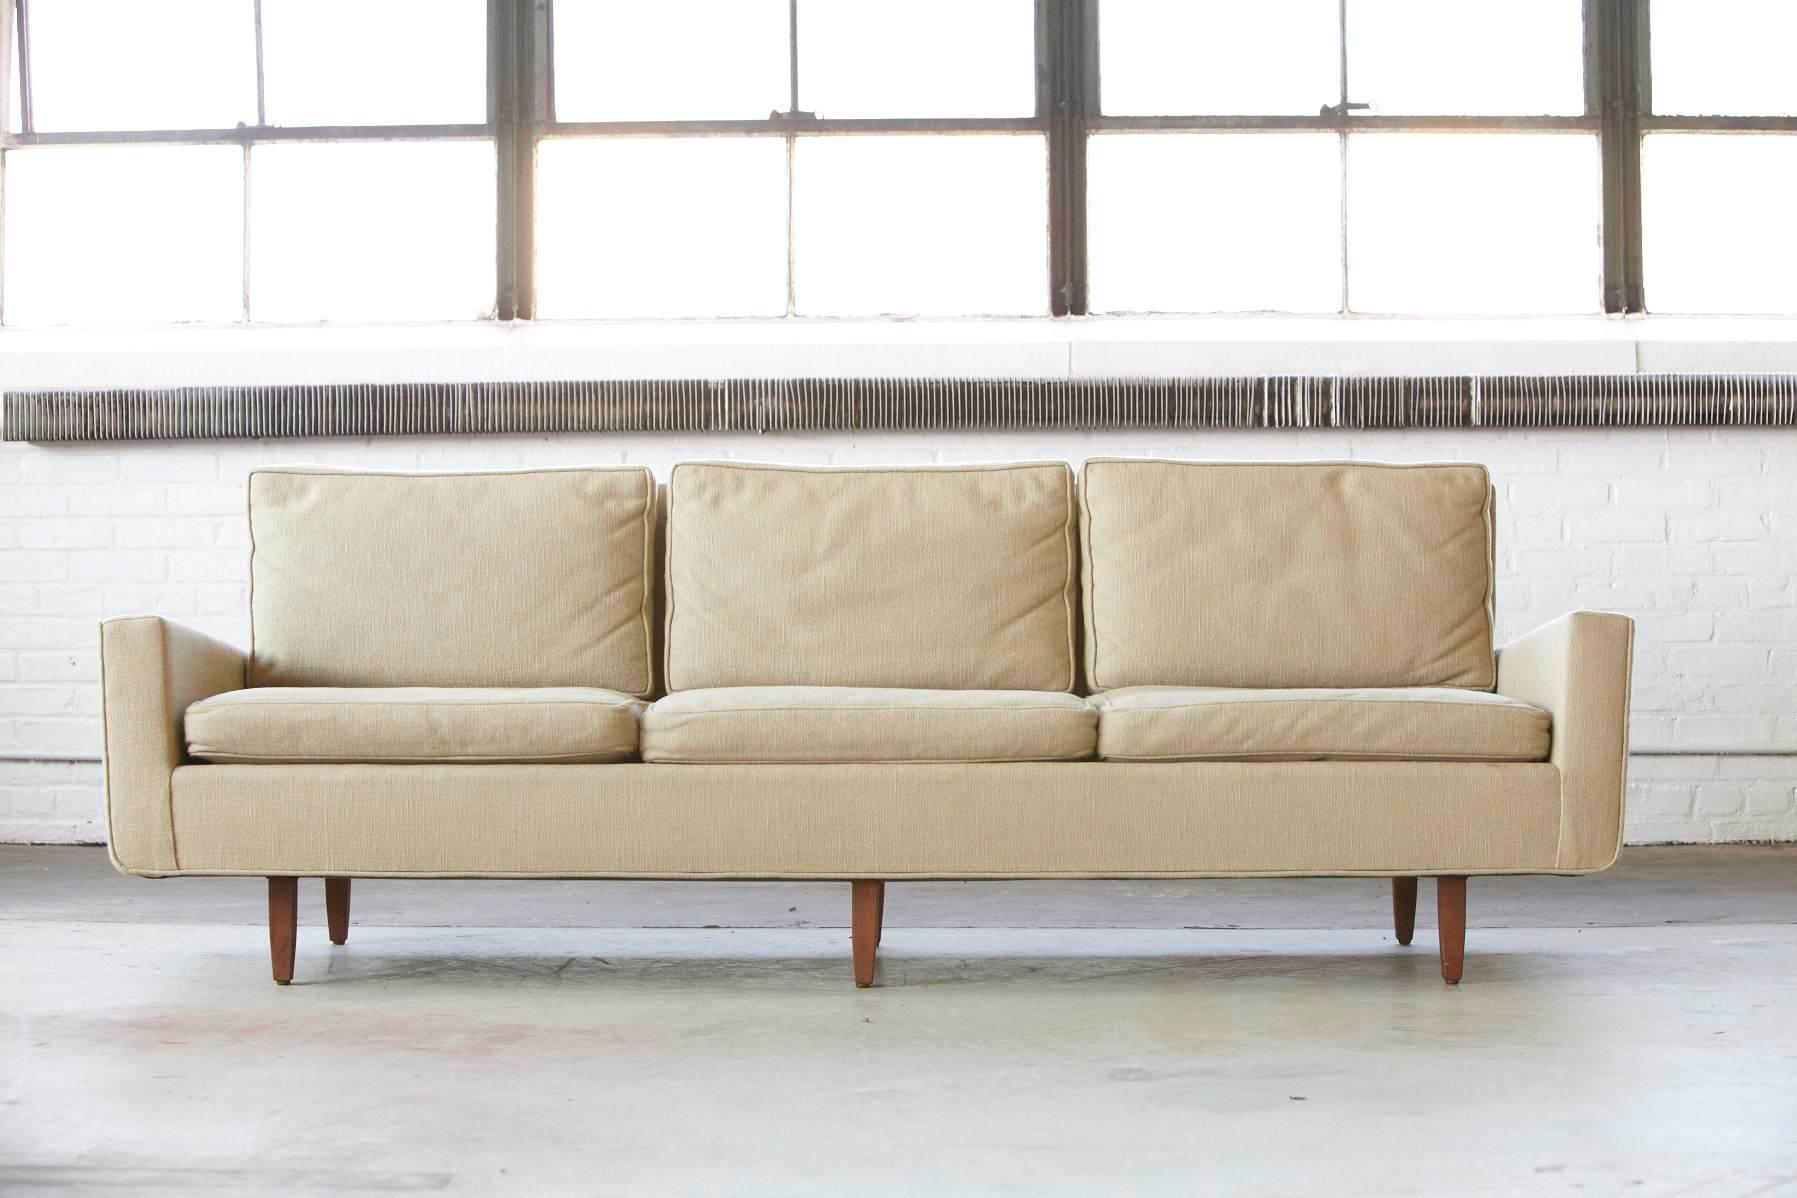 Oiled Early Florence Knoll Sofa Model # 26D from 1967 with Original Fabric